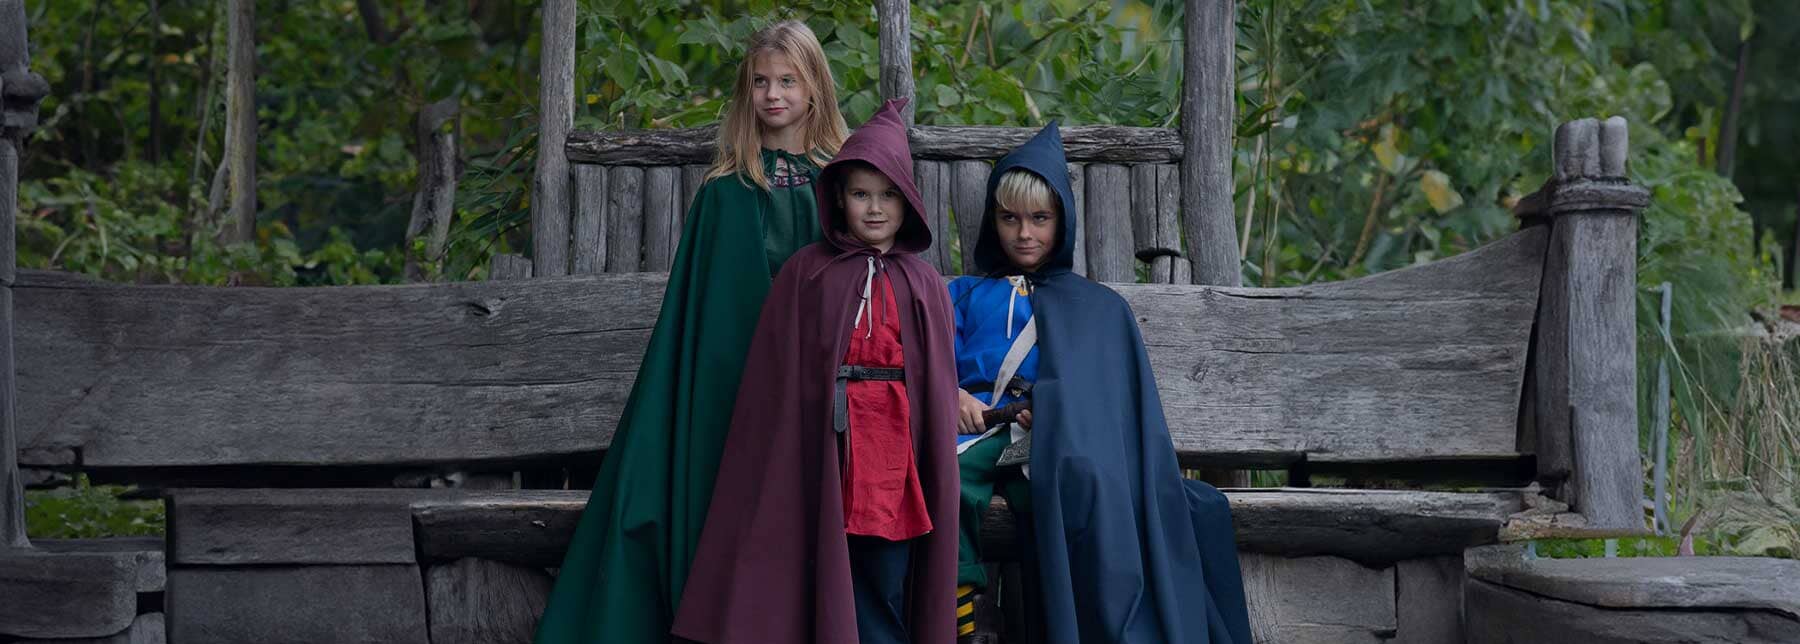 Capes & Cloaks for Kids